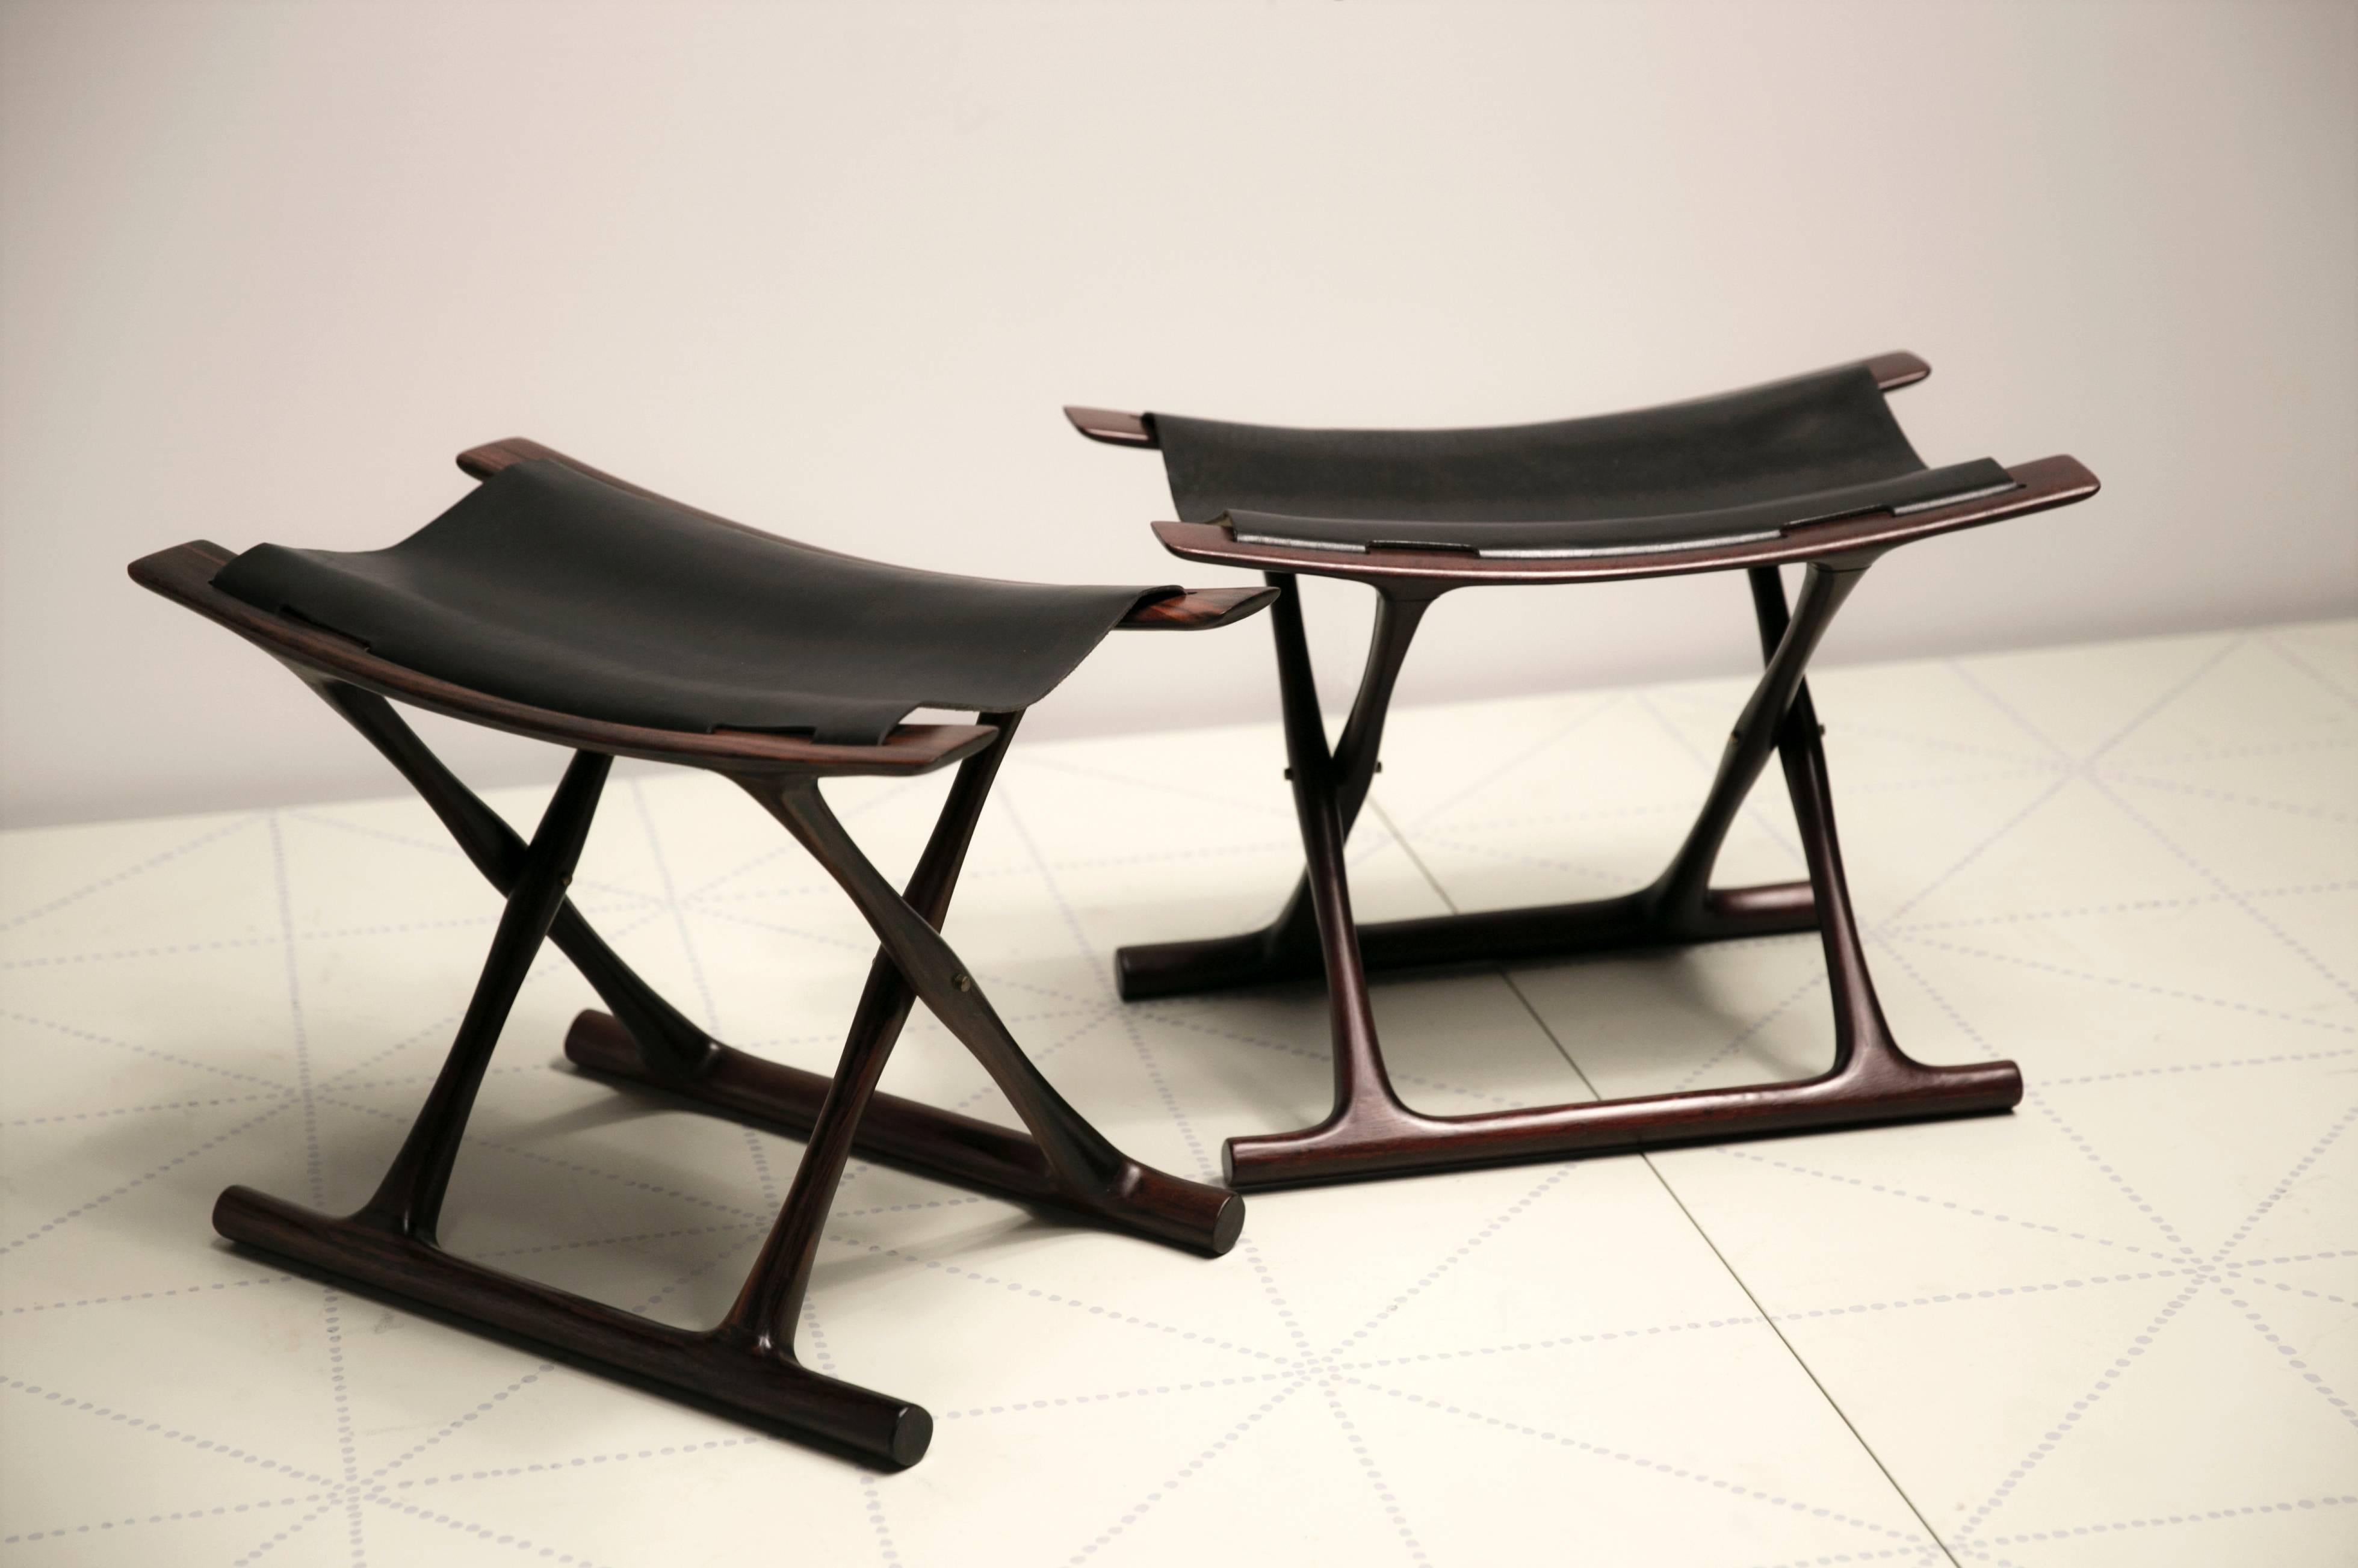 Danish Egyptian Folding Stool in Indian Rosewood by Ole Wanscher